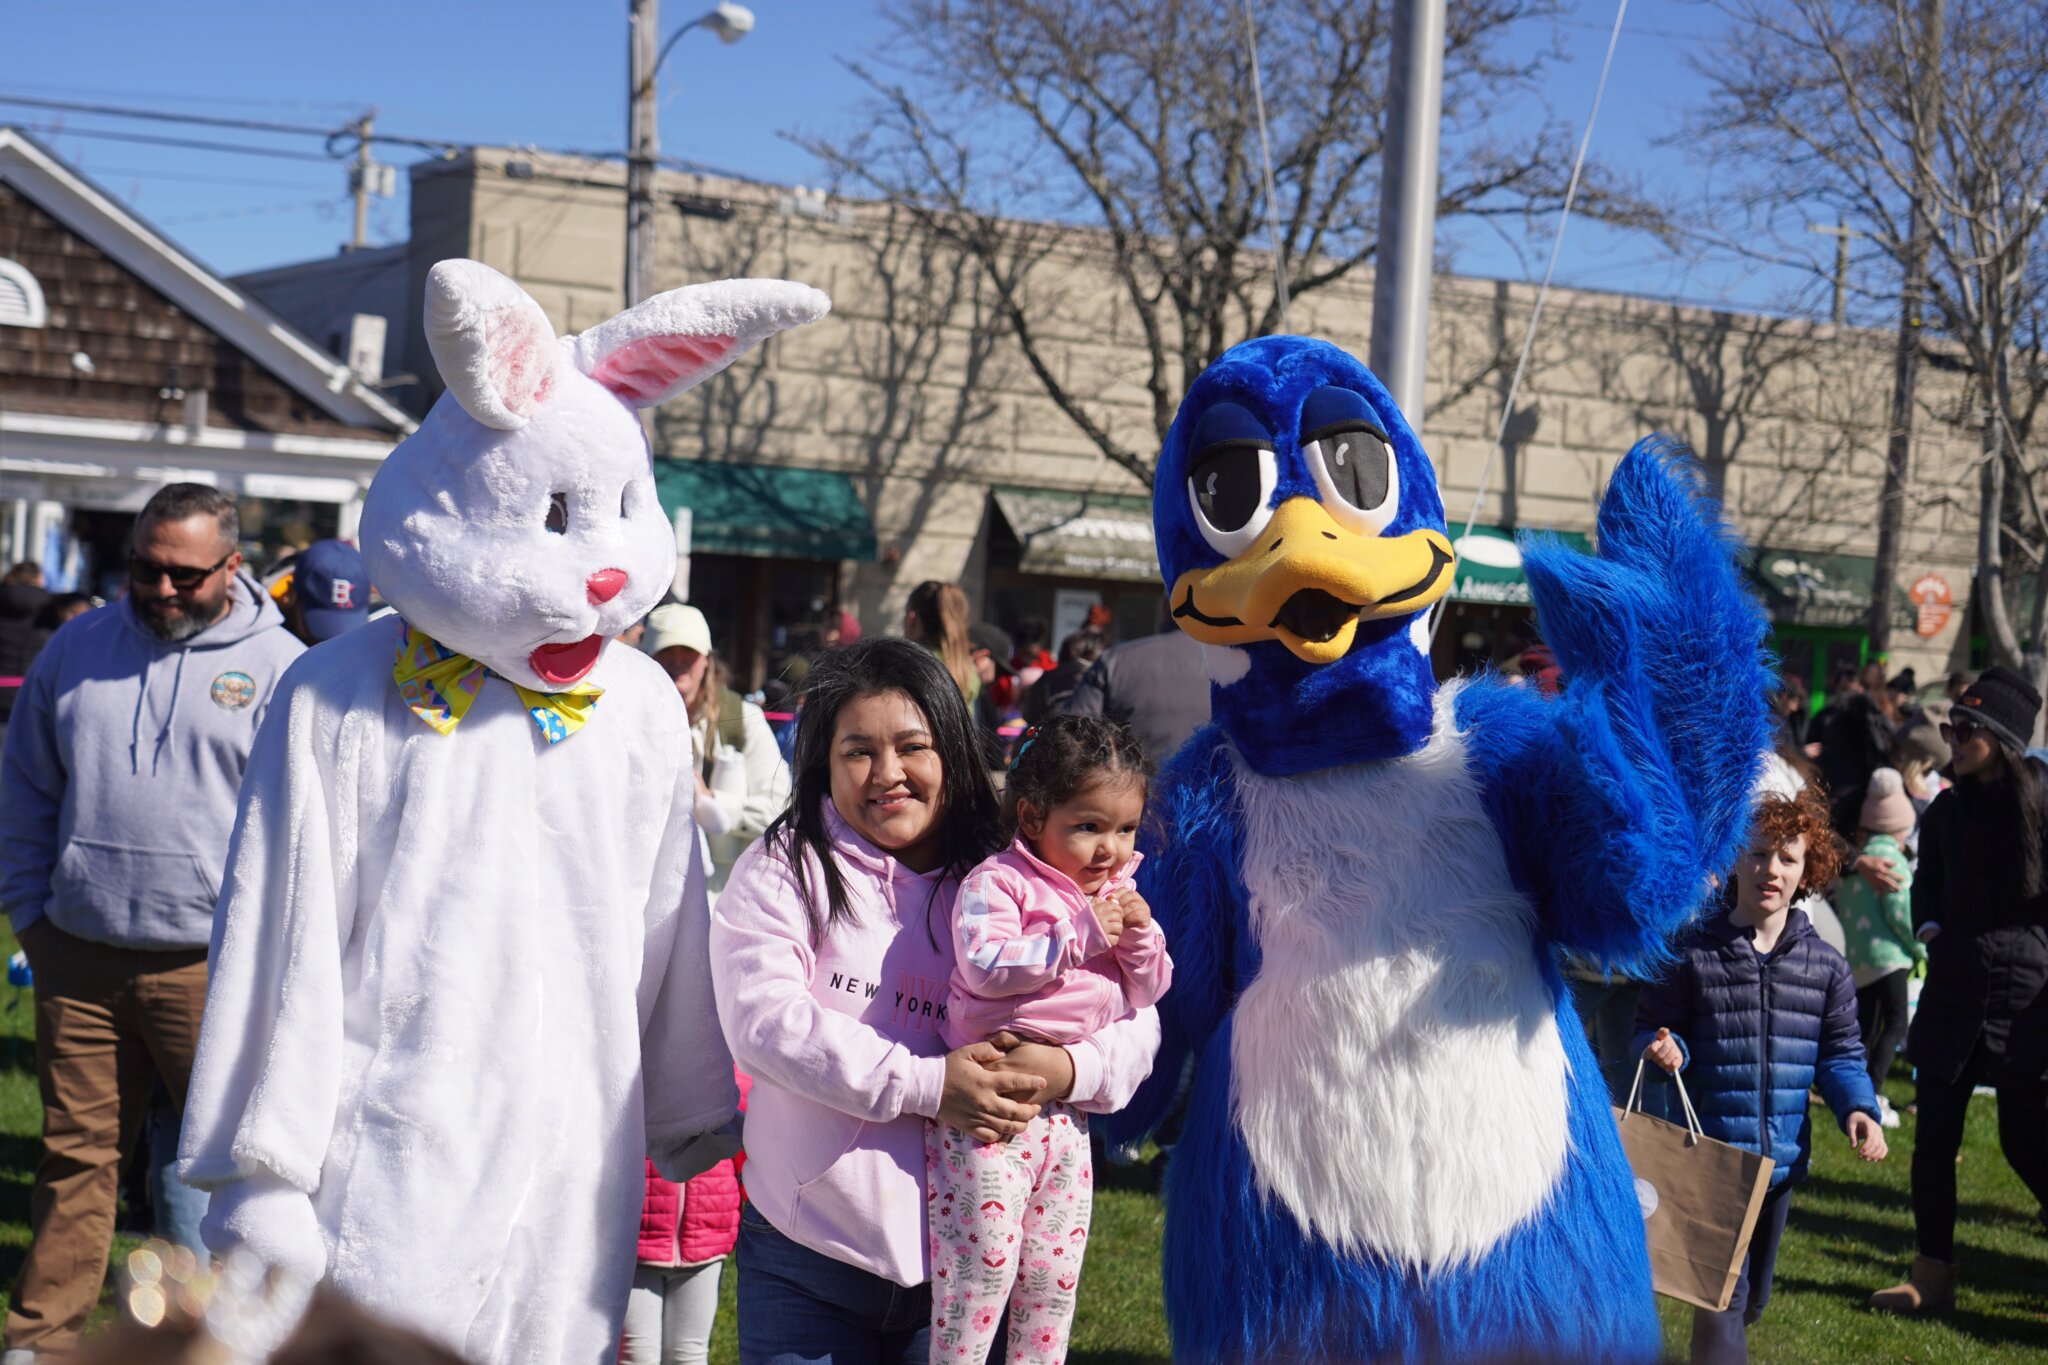 The Easter Bunny, Jalida, Emilia Venesula with Blue Duck at the Egg Roll